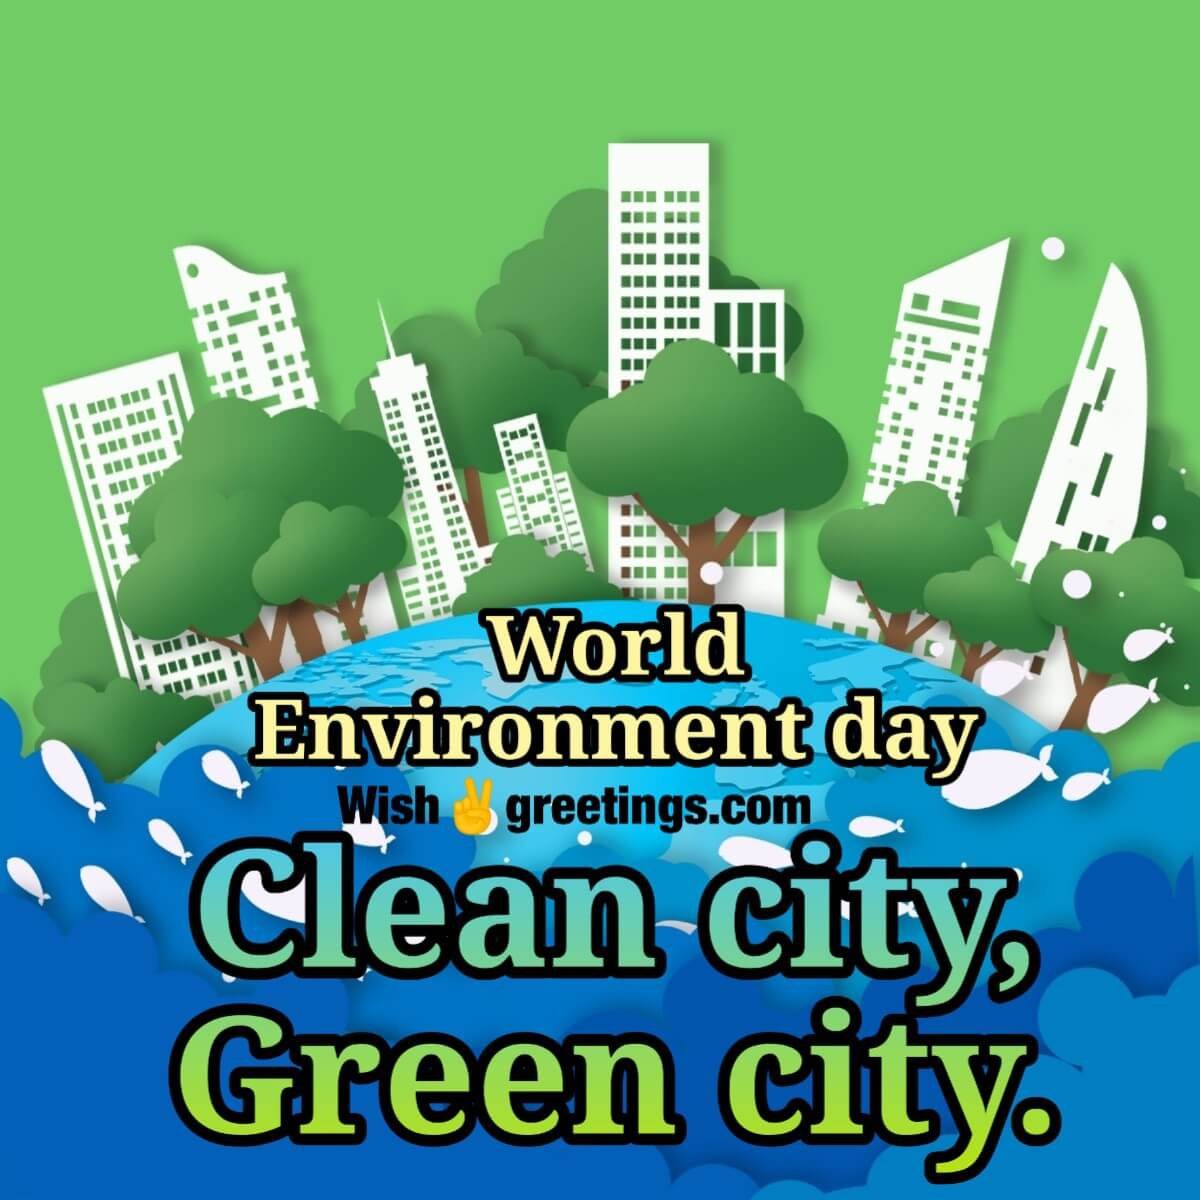 World Environment Day Slogans, Quotes Images - Wish Greetings